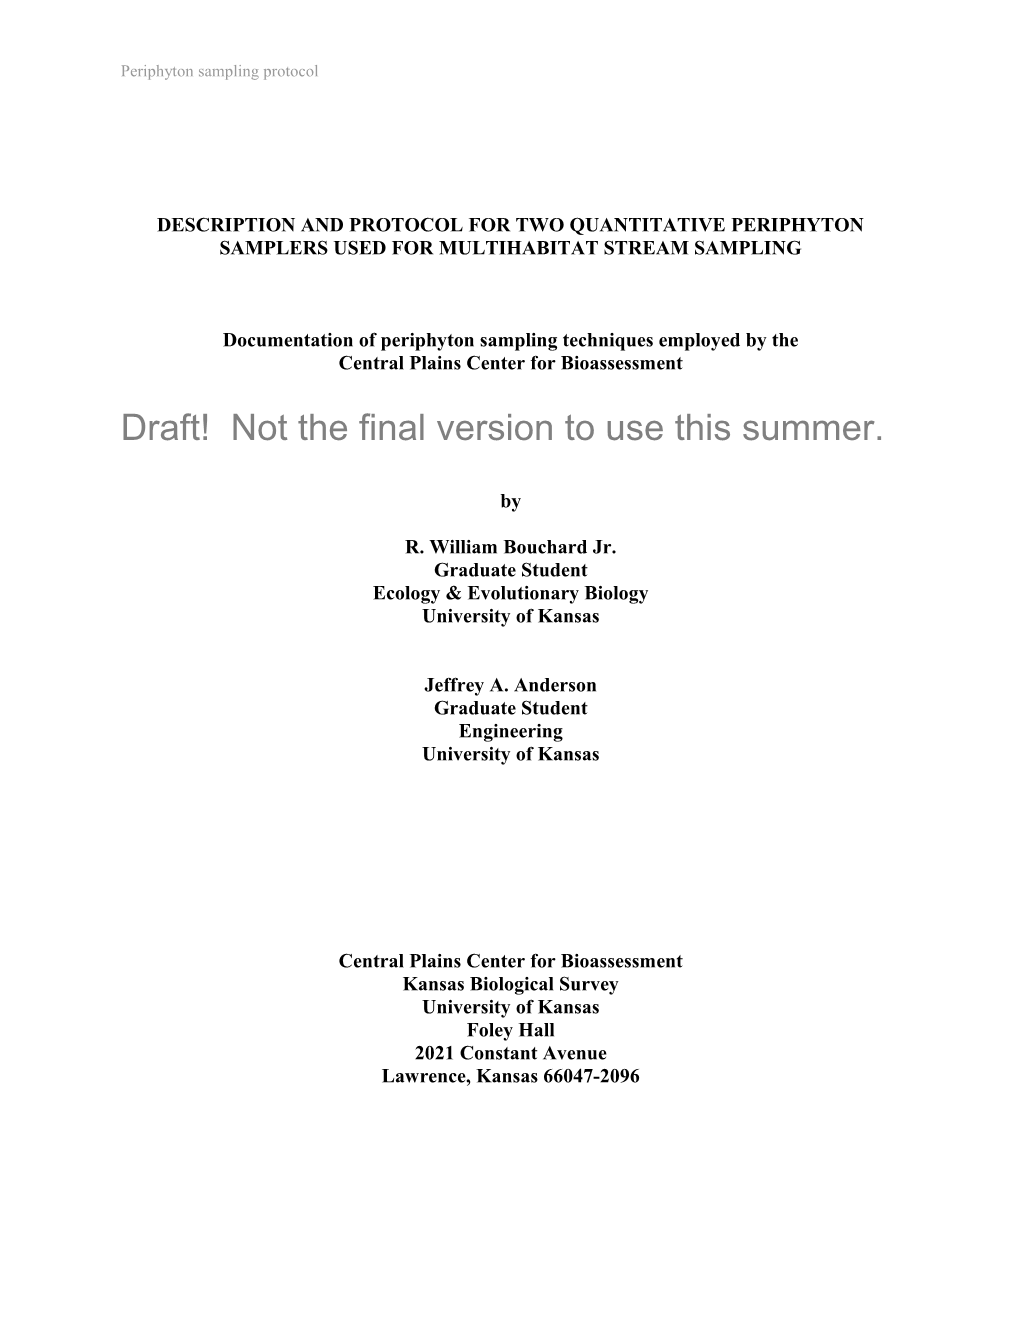 Description and Protocol of Periphyton Samplers Used by the Central Plains Center For